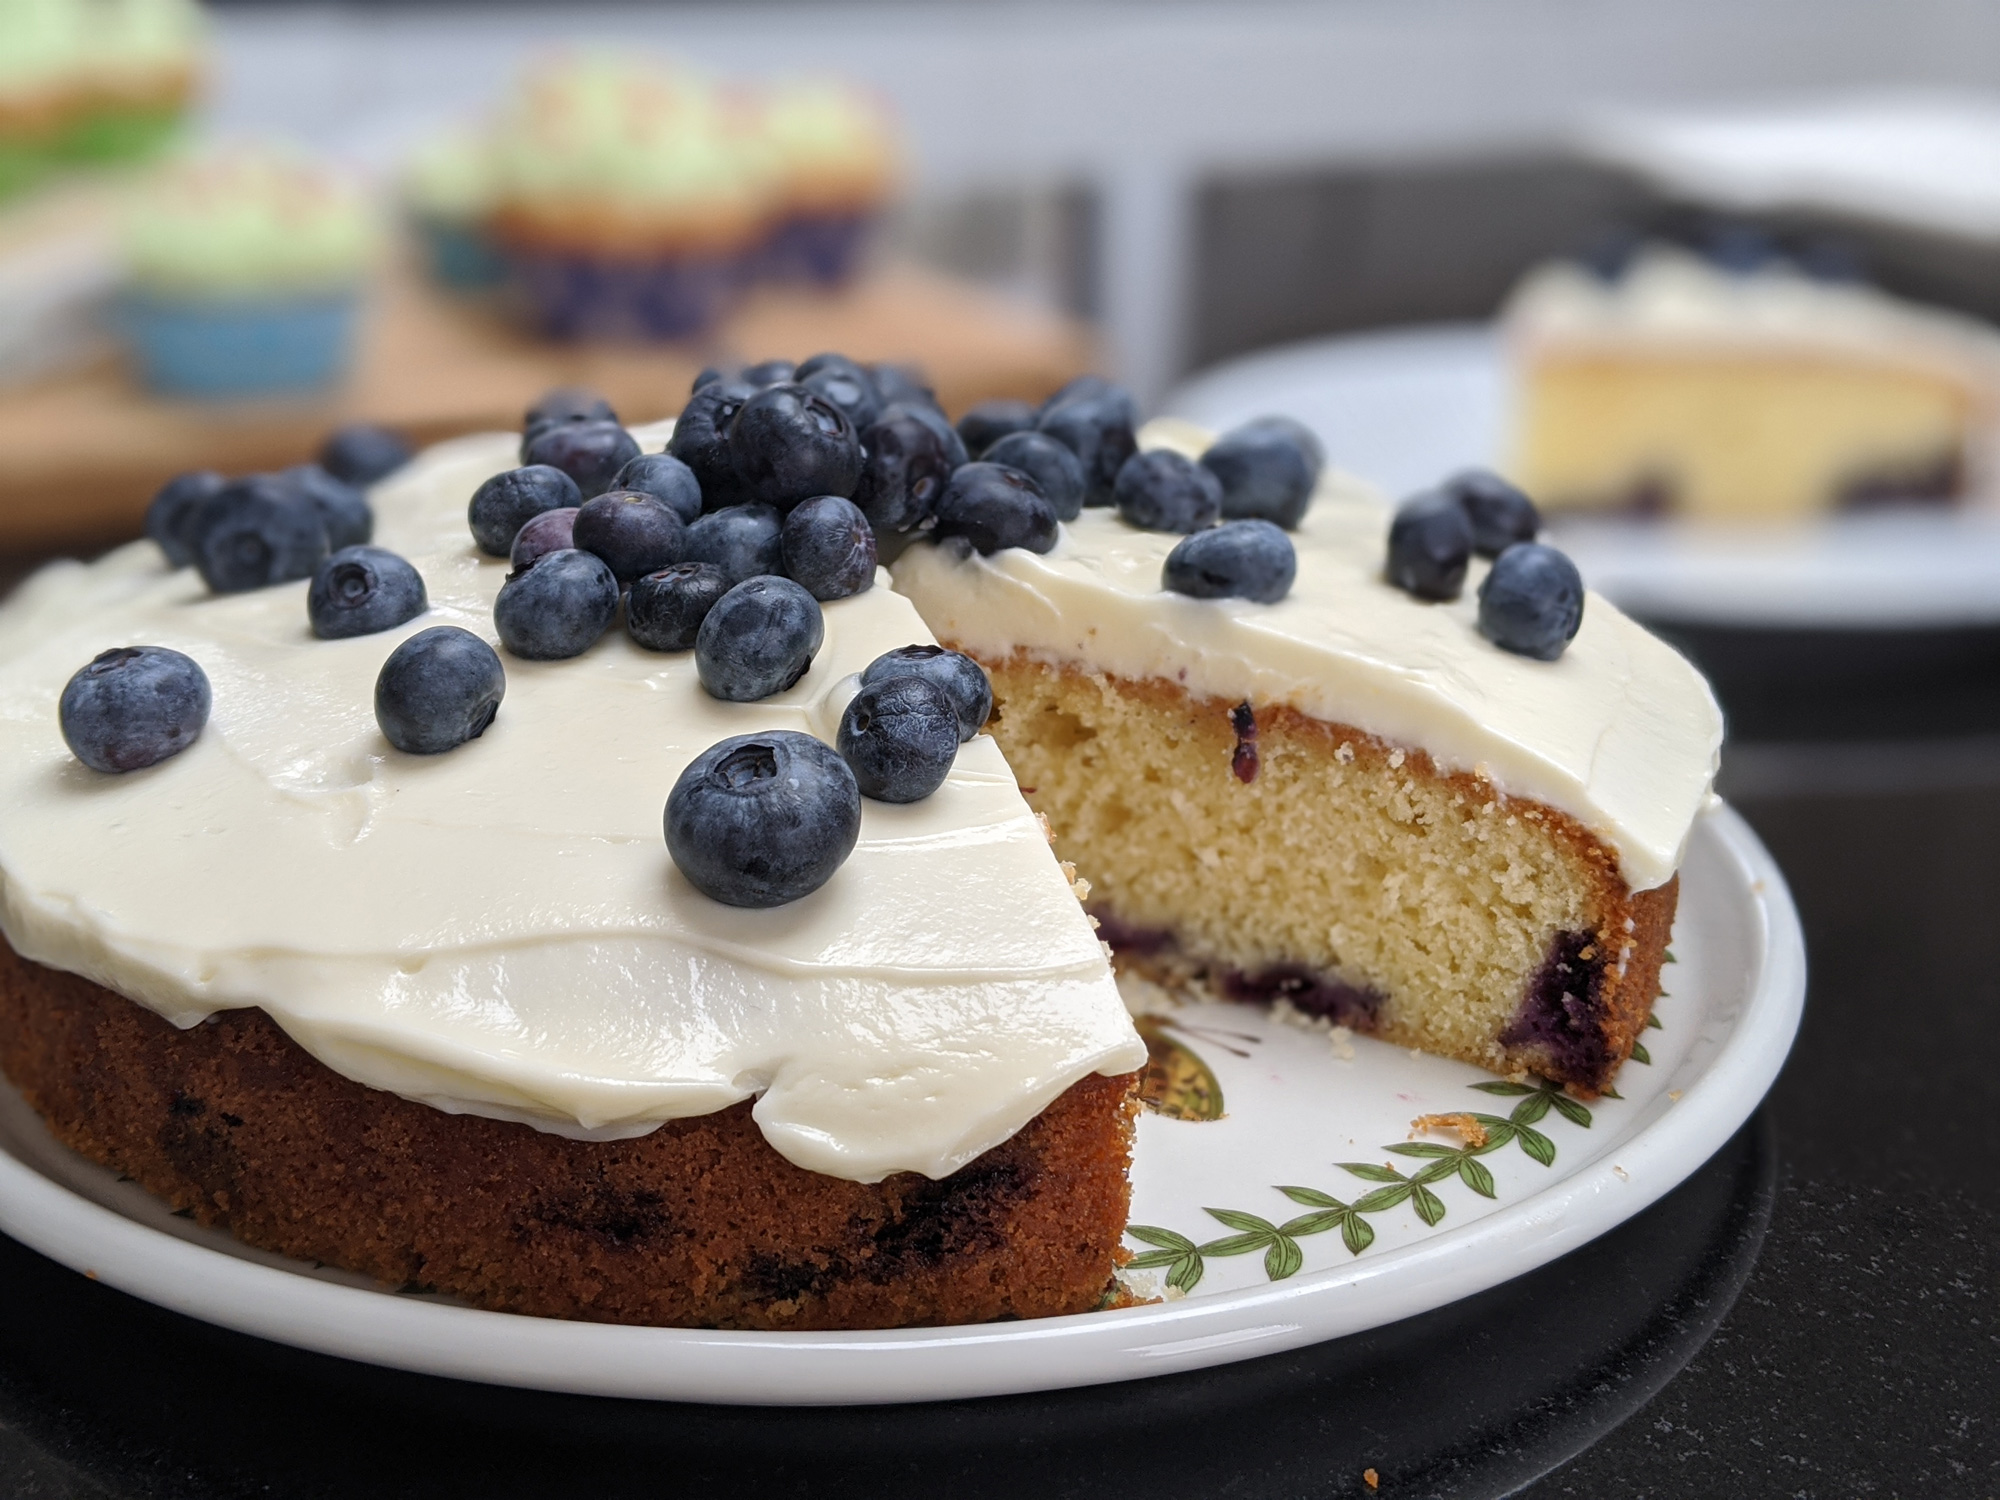 Blueberry Cake with Cream Cheese Frosting - My Gluten Free Guide